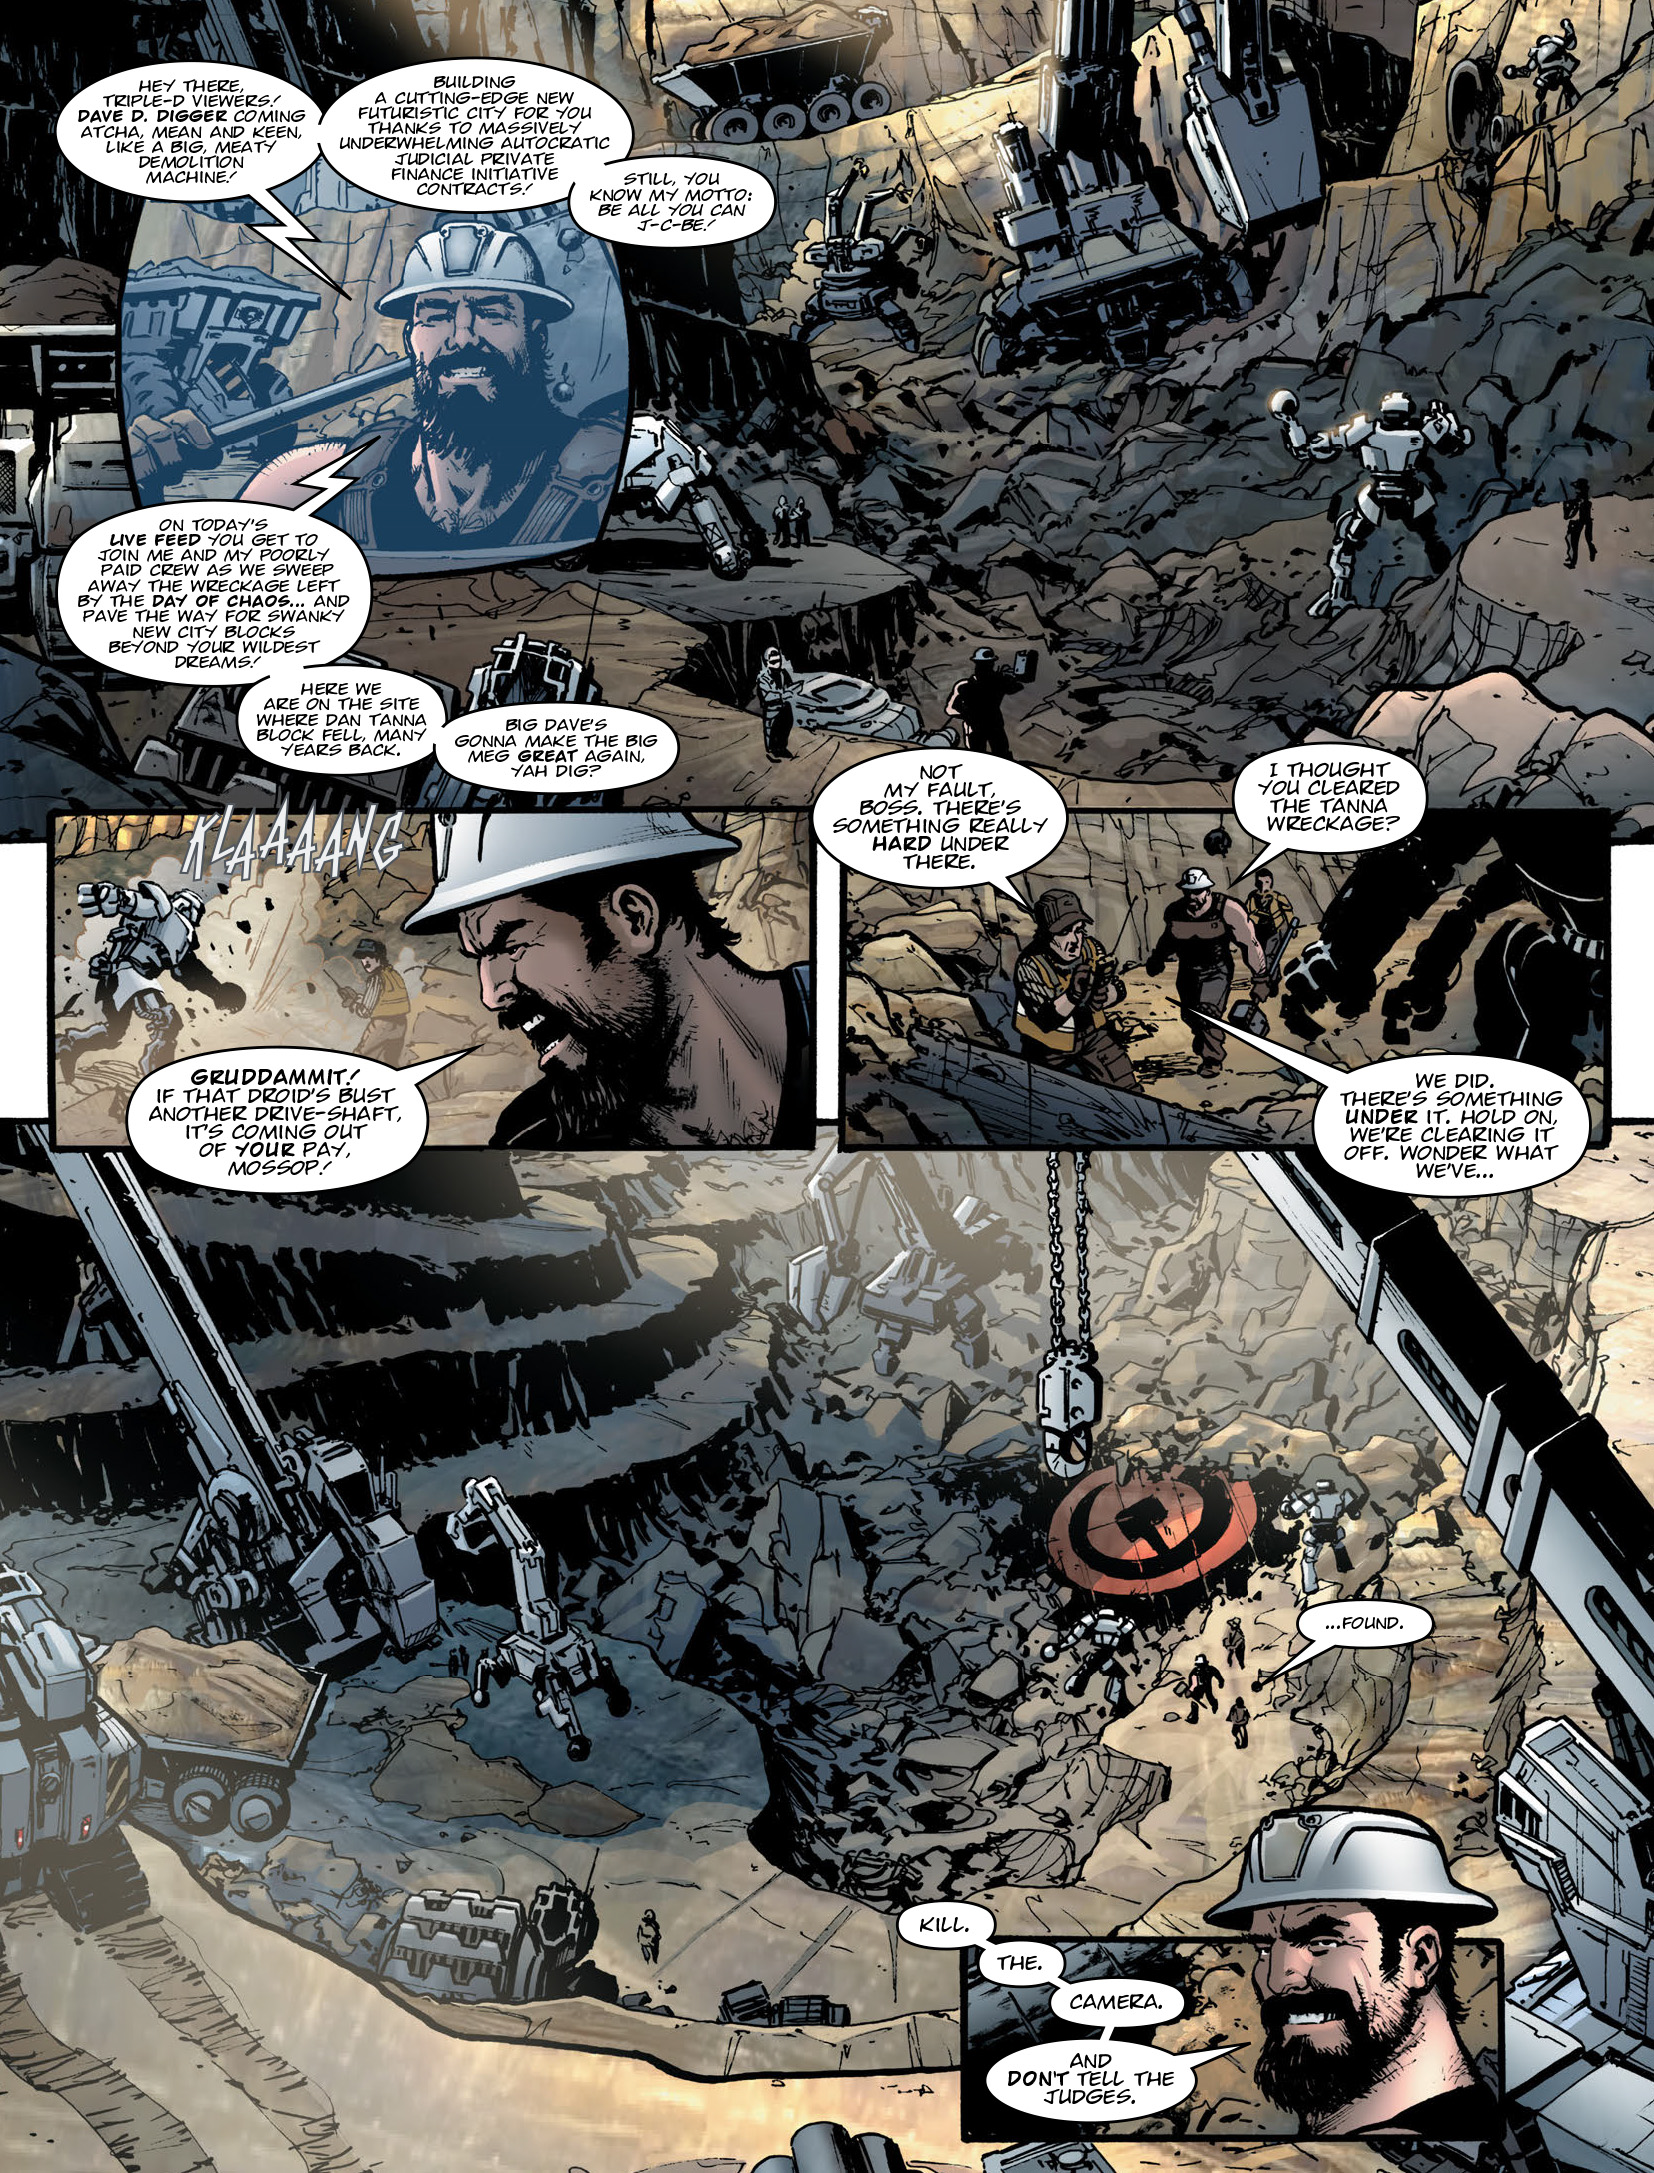 2000 AD: Chapter 2124 - Page 4